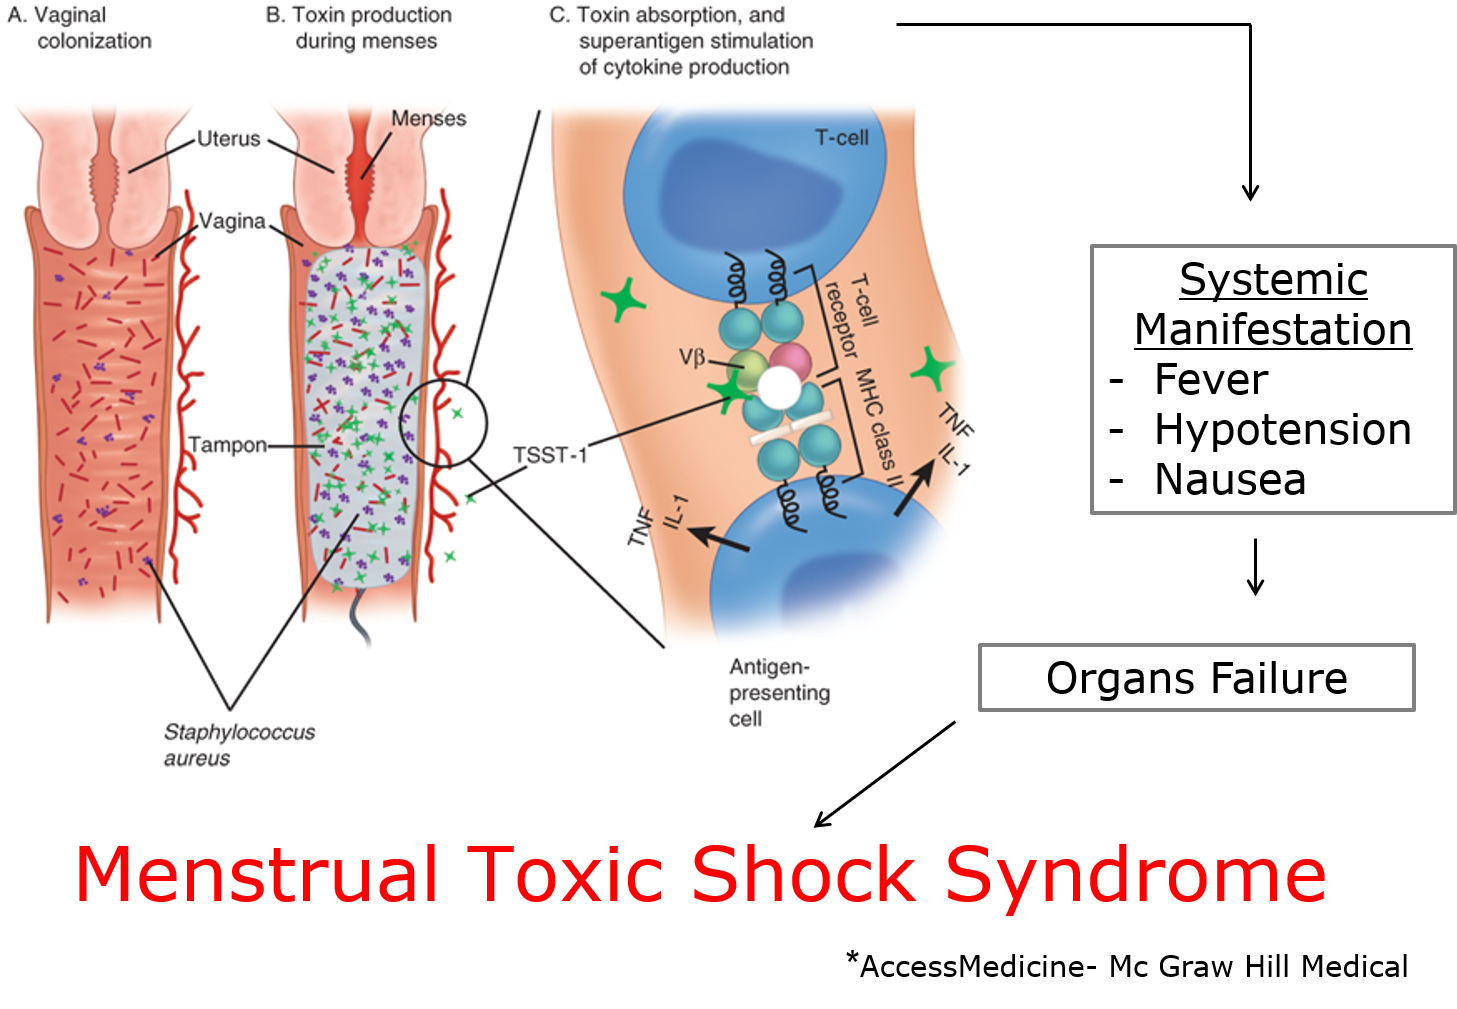 Staphylococcal Toxic Shock Syndrome